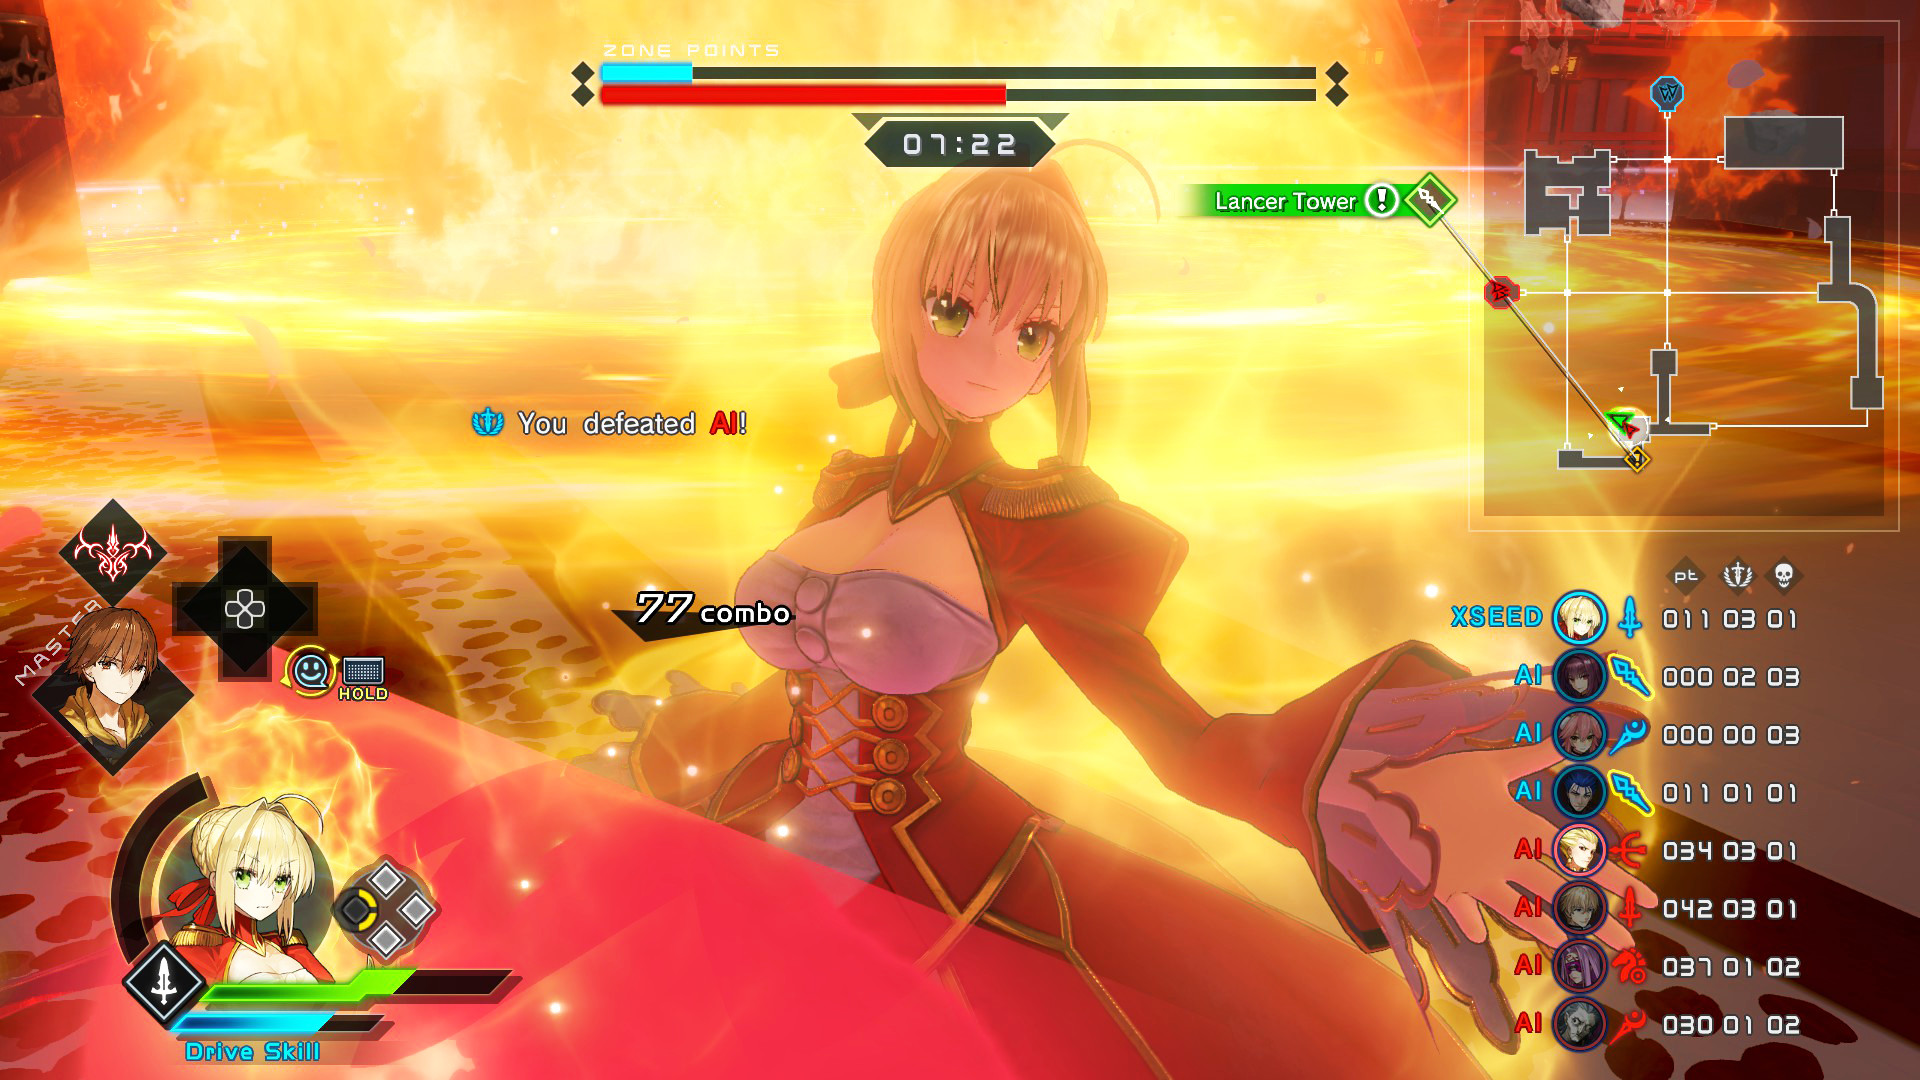 Fate/EXTELLA - Stay night Model (Nameless) on Steam